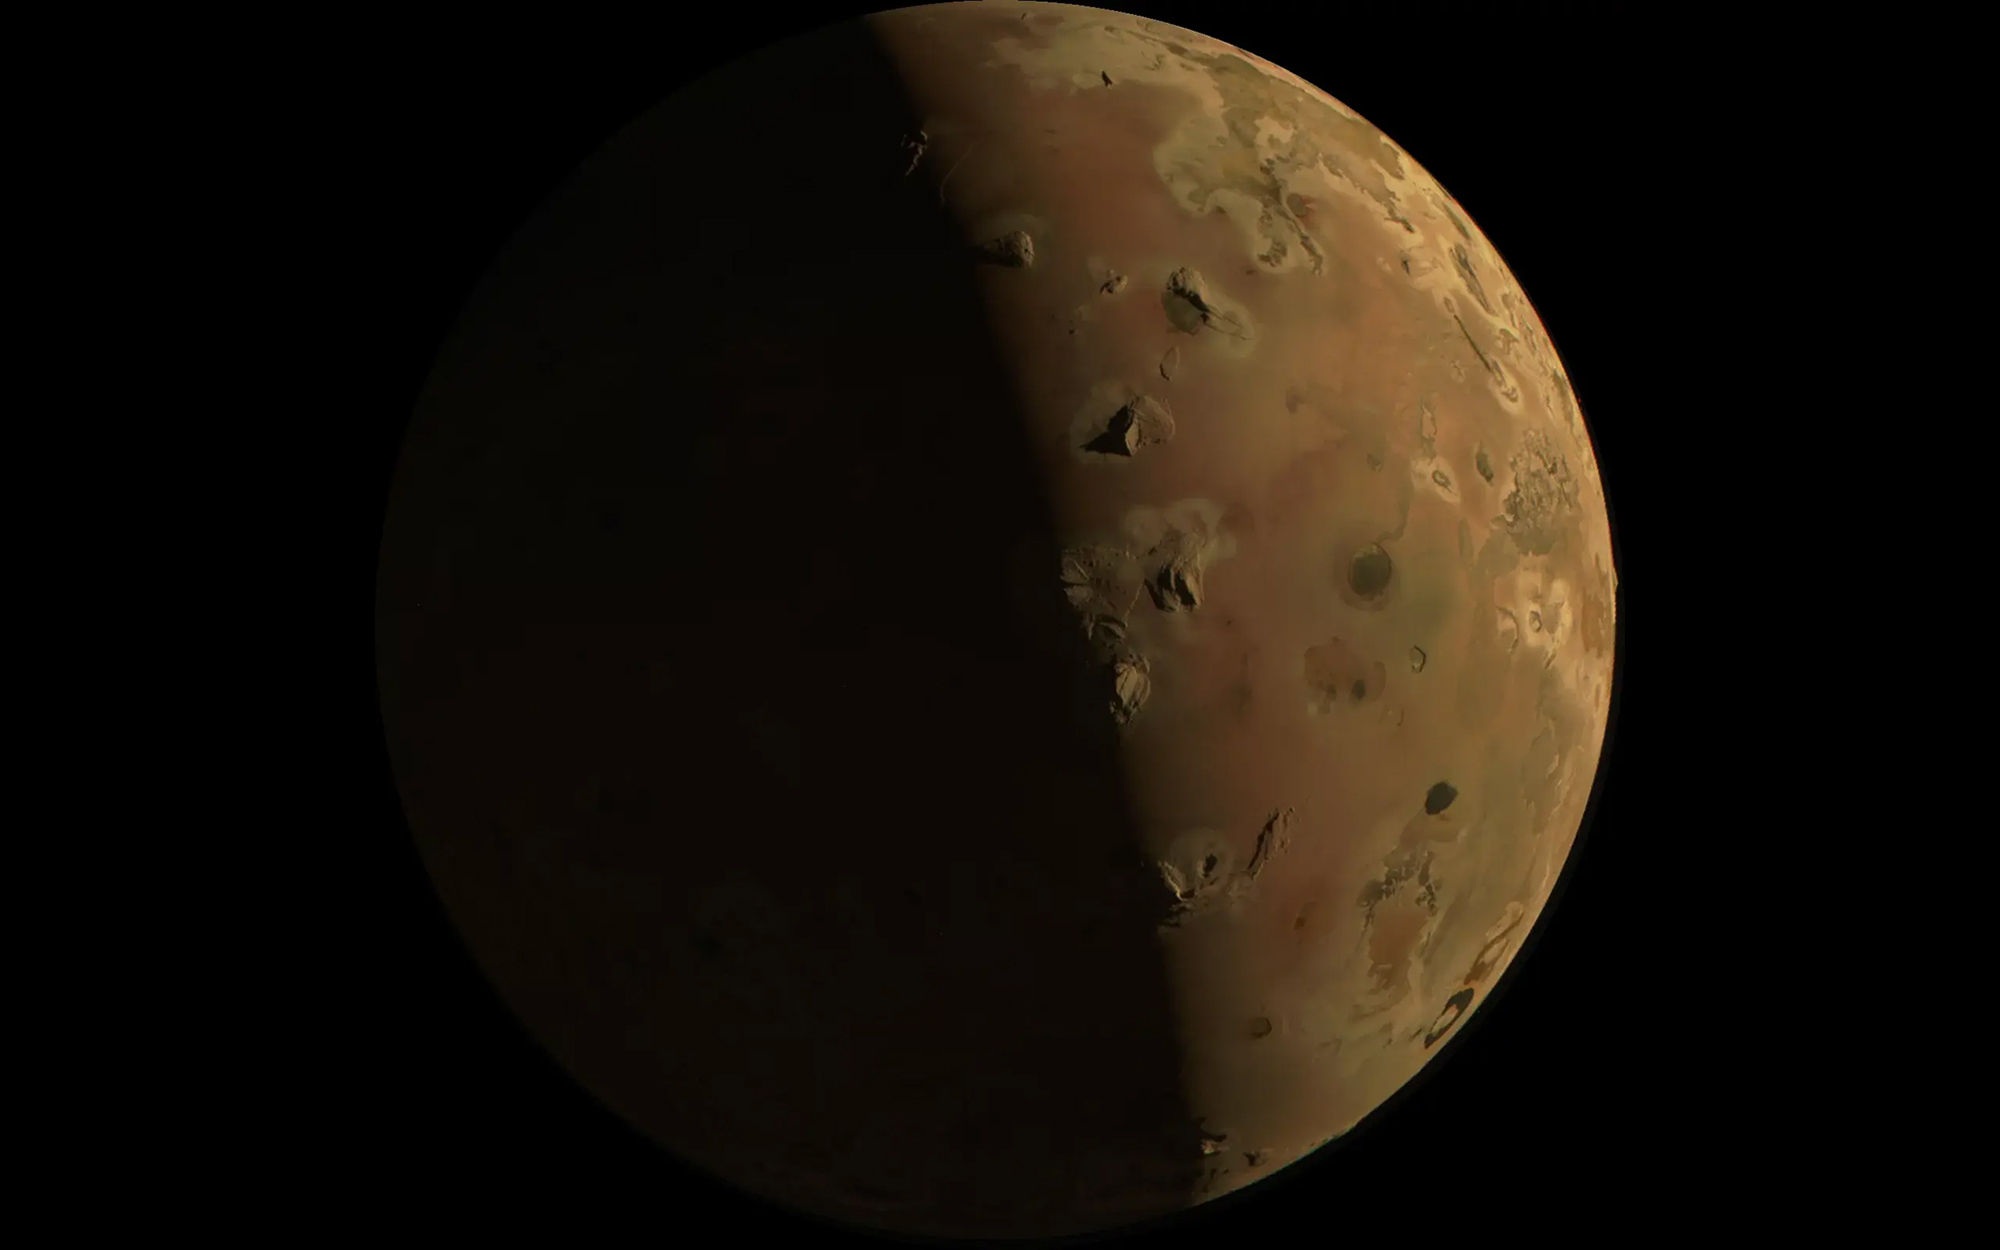 See the most volcanic world in our solar system in new NASA images